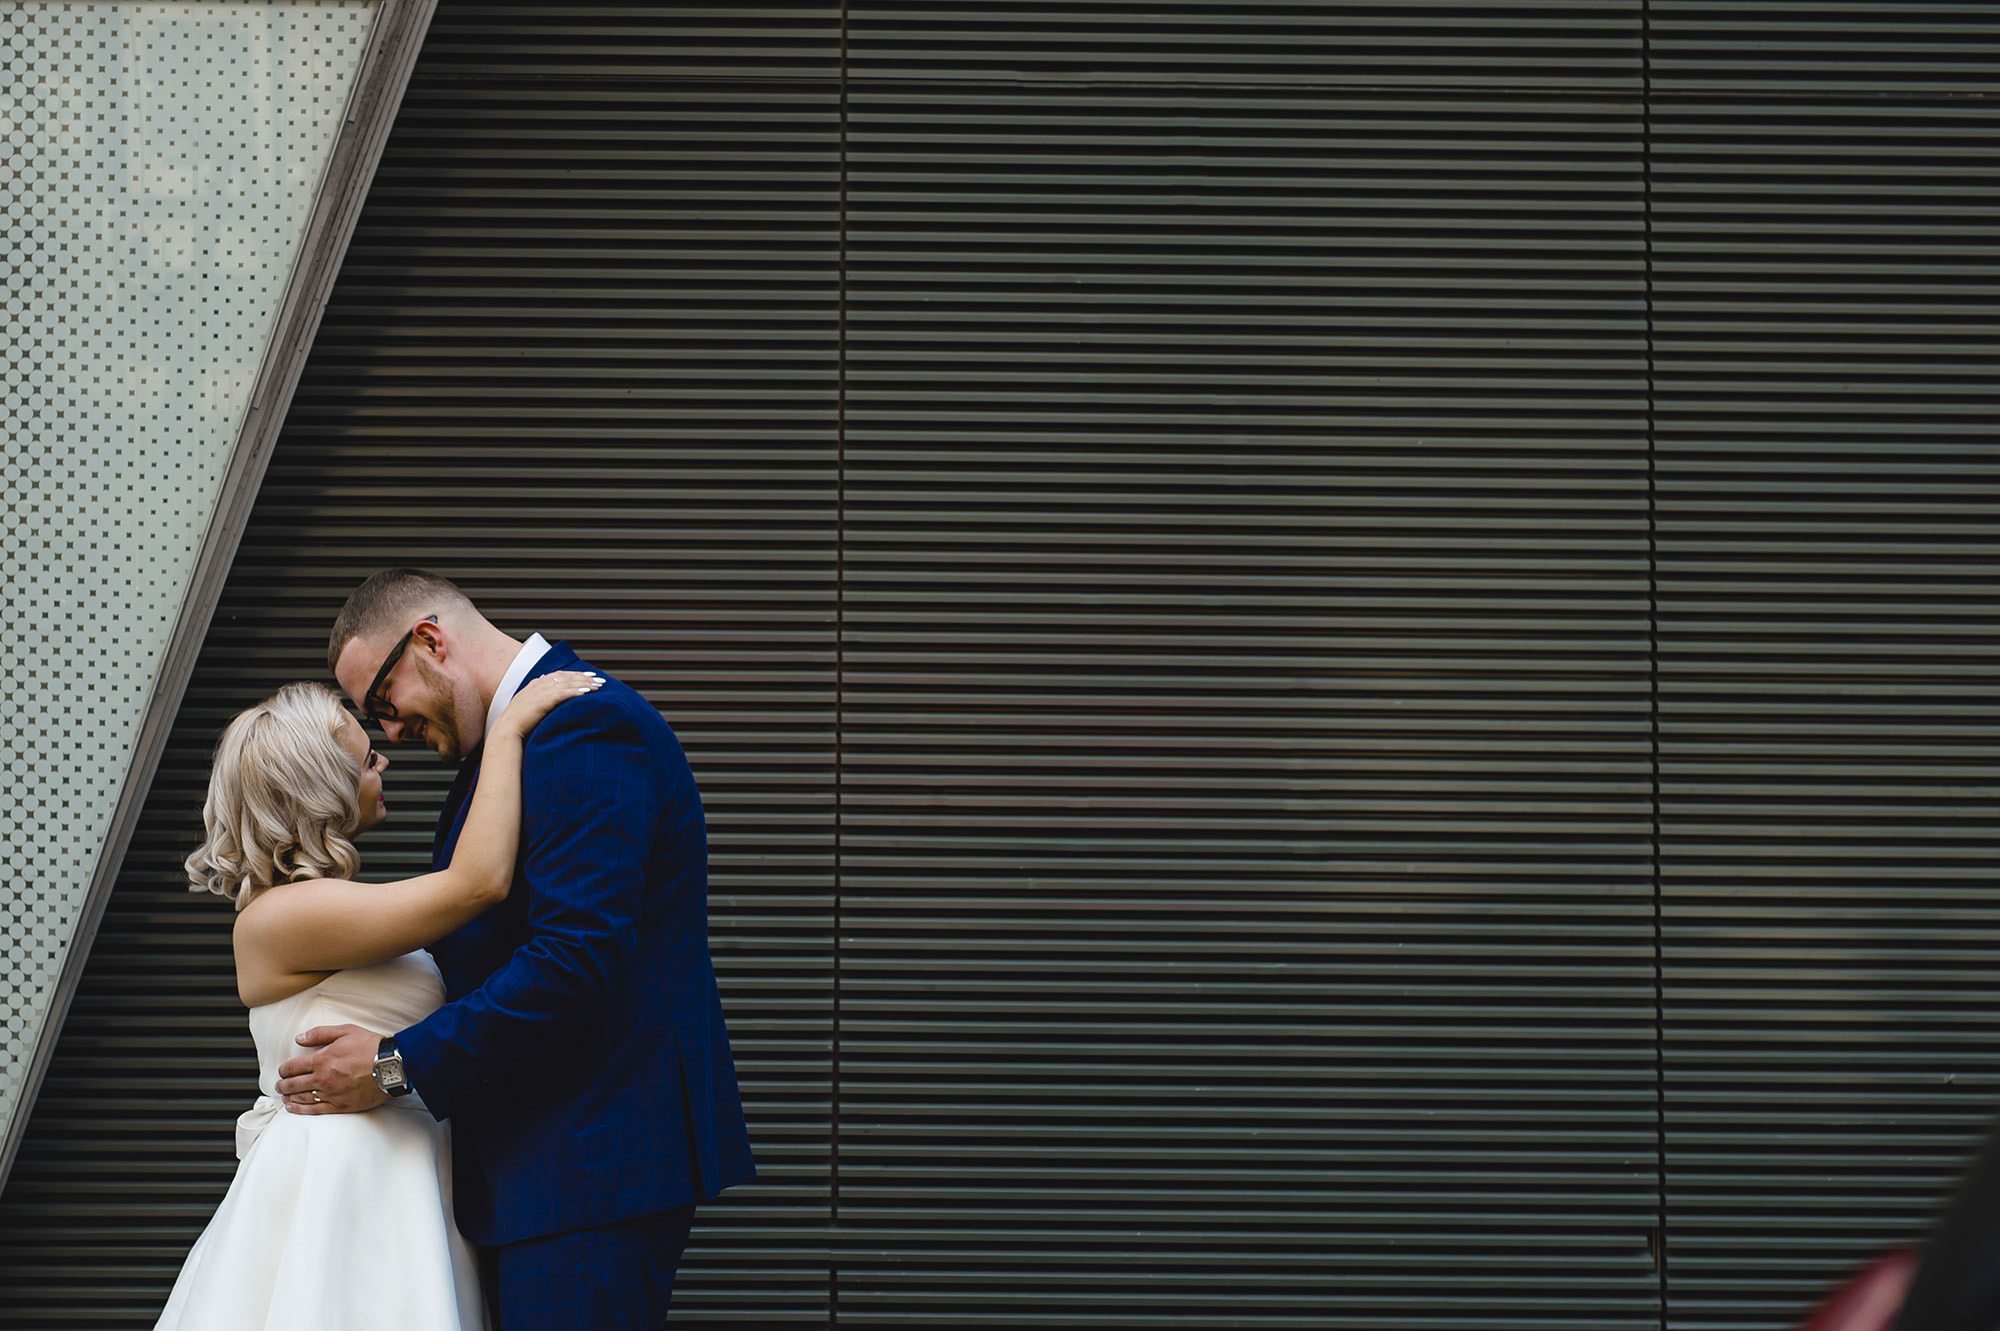 bride and groom portrait in central london